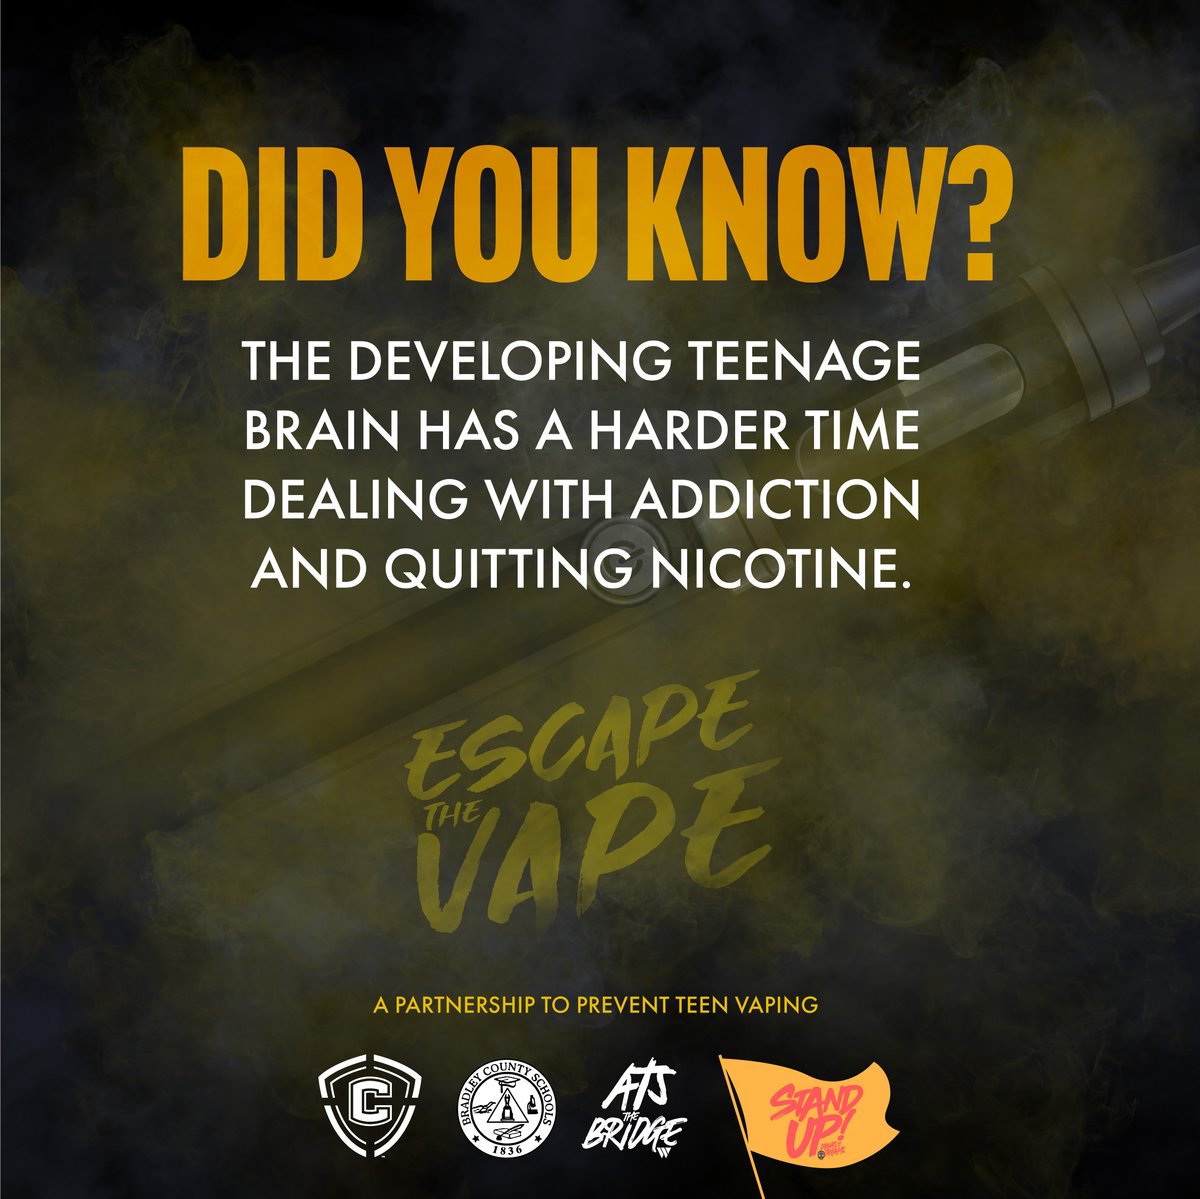 🧠💡 The teenage brain is a work in progress, and navigating addiction can be especially challenging. Research shows that the developing teenage brain has a tougher time dealing with addiction and breaking free from nicotine dependence. 🚭💔